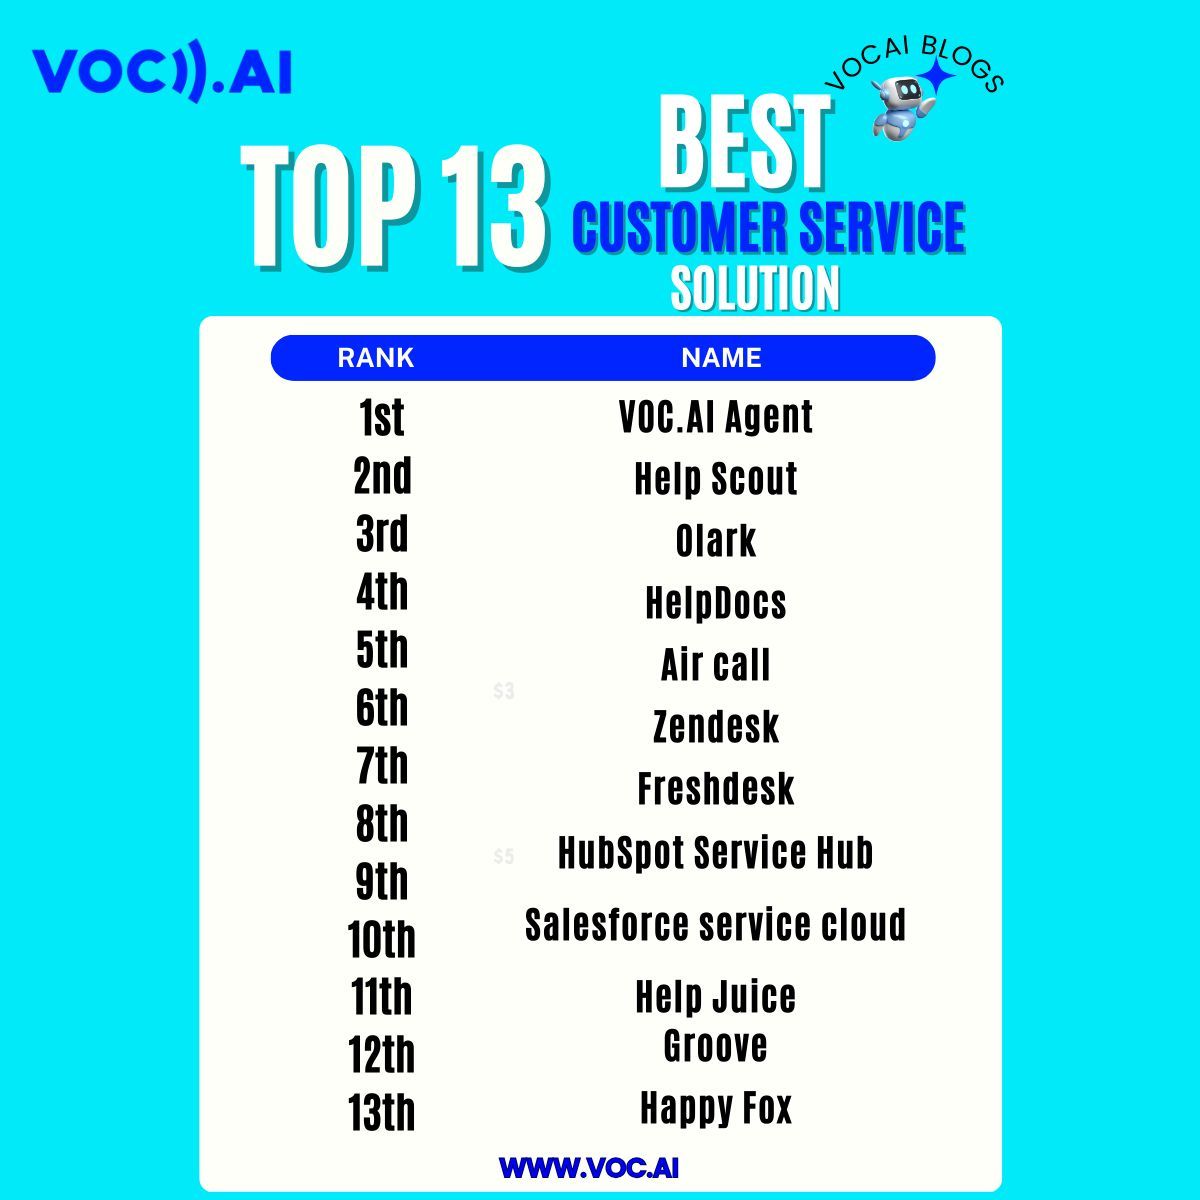 89% of consumers are very likely to make another purchase after they experience positive customer service 💯 Explore the ones that align with your needs and test their free trial. Read full article here @ buff.ly/3WFi7PK #Vocai #chatbot #customerservice #vocaiagent